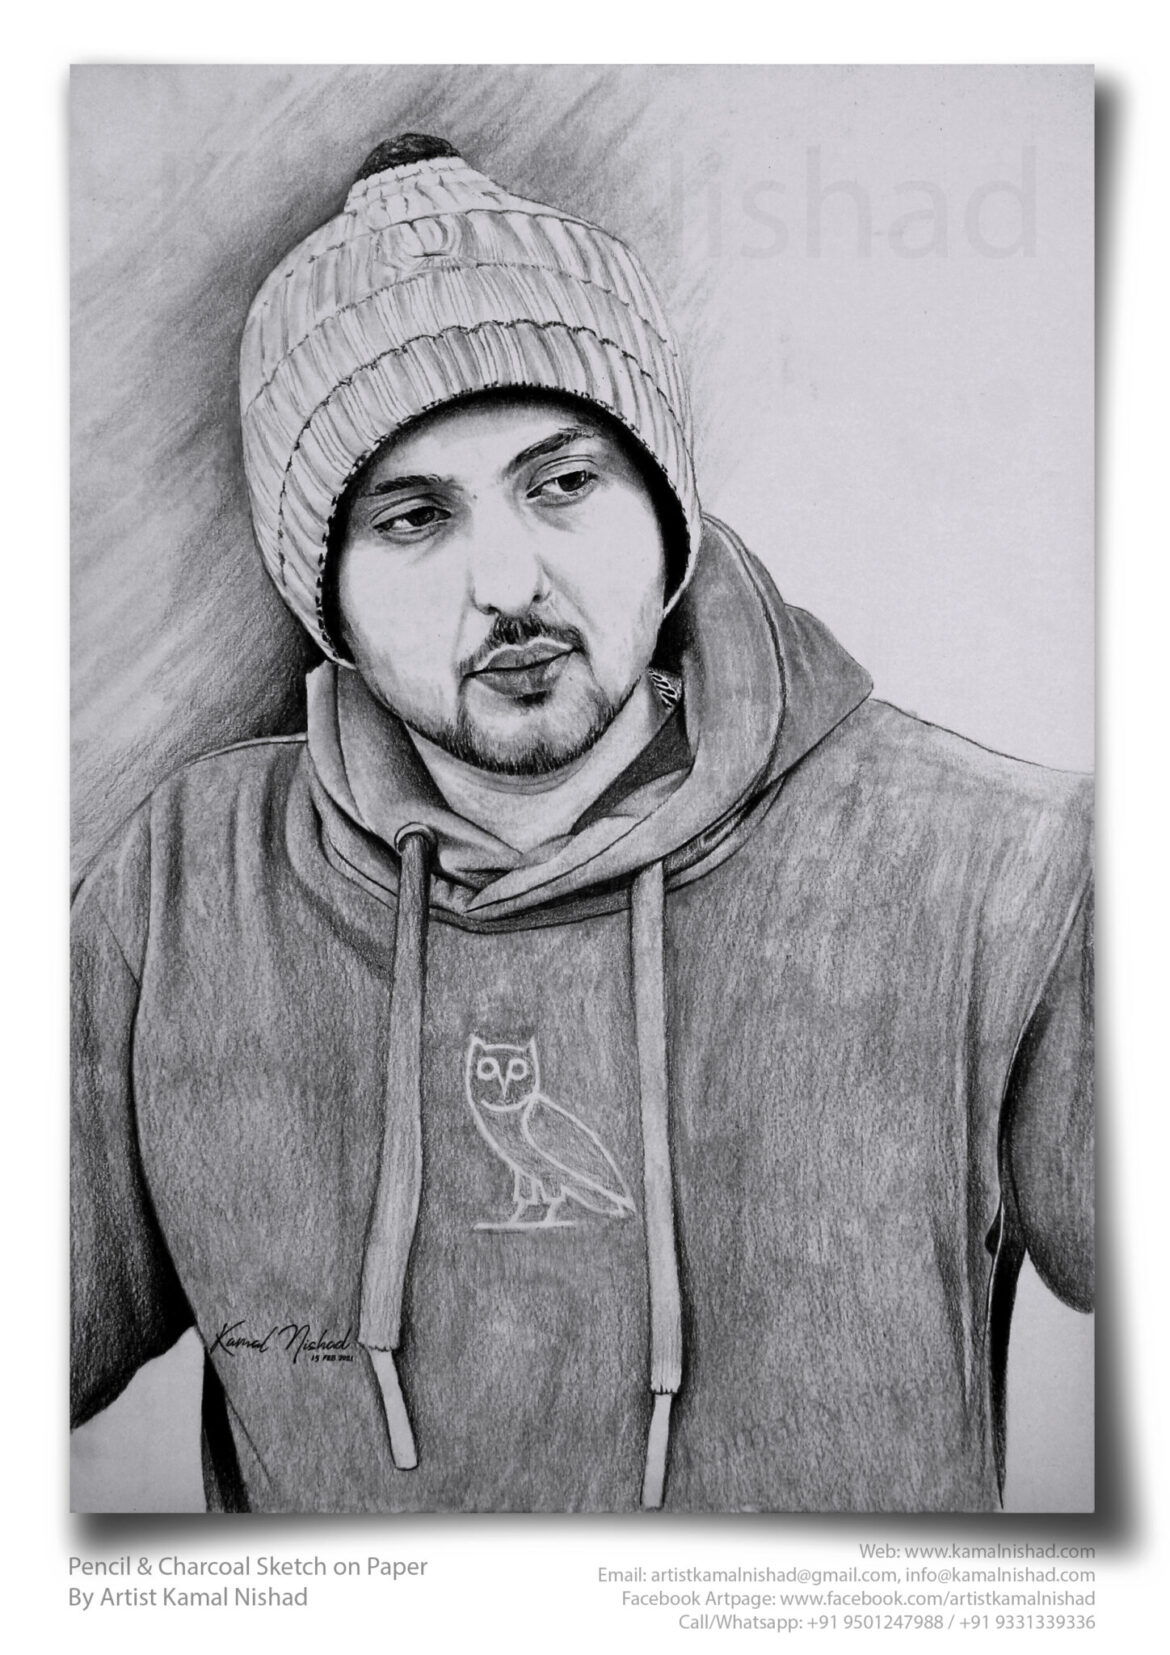 WINSOME | Pencil & Charcoal Sketch Title : WINSOME Medium : Pencil & Charcoal Sketch Size : A3 Paper size (Sketch size 29.7 x 42.0 cm*) Artist : Kamal Nishad This is a Handmade/hand-drawn Sketch made with Pencil & Charcoal “WINSOME”. This is a Gift from One of my Client to his friend. 💐 SIZE: Paper size A3 (work area 11.7 x 16.5 inches *estimated) Created by © Kamal Nishad. All rights reserved.